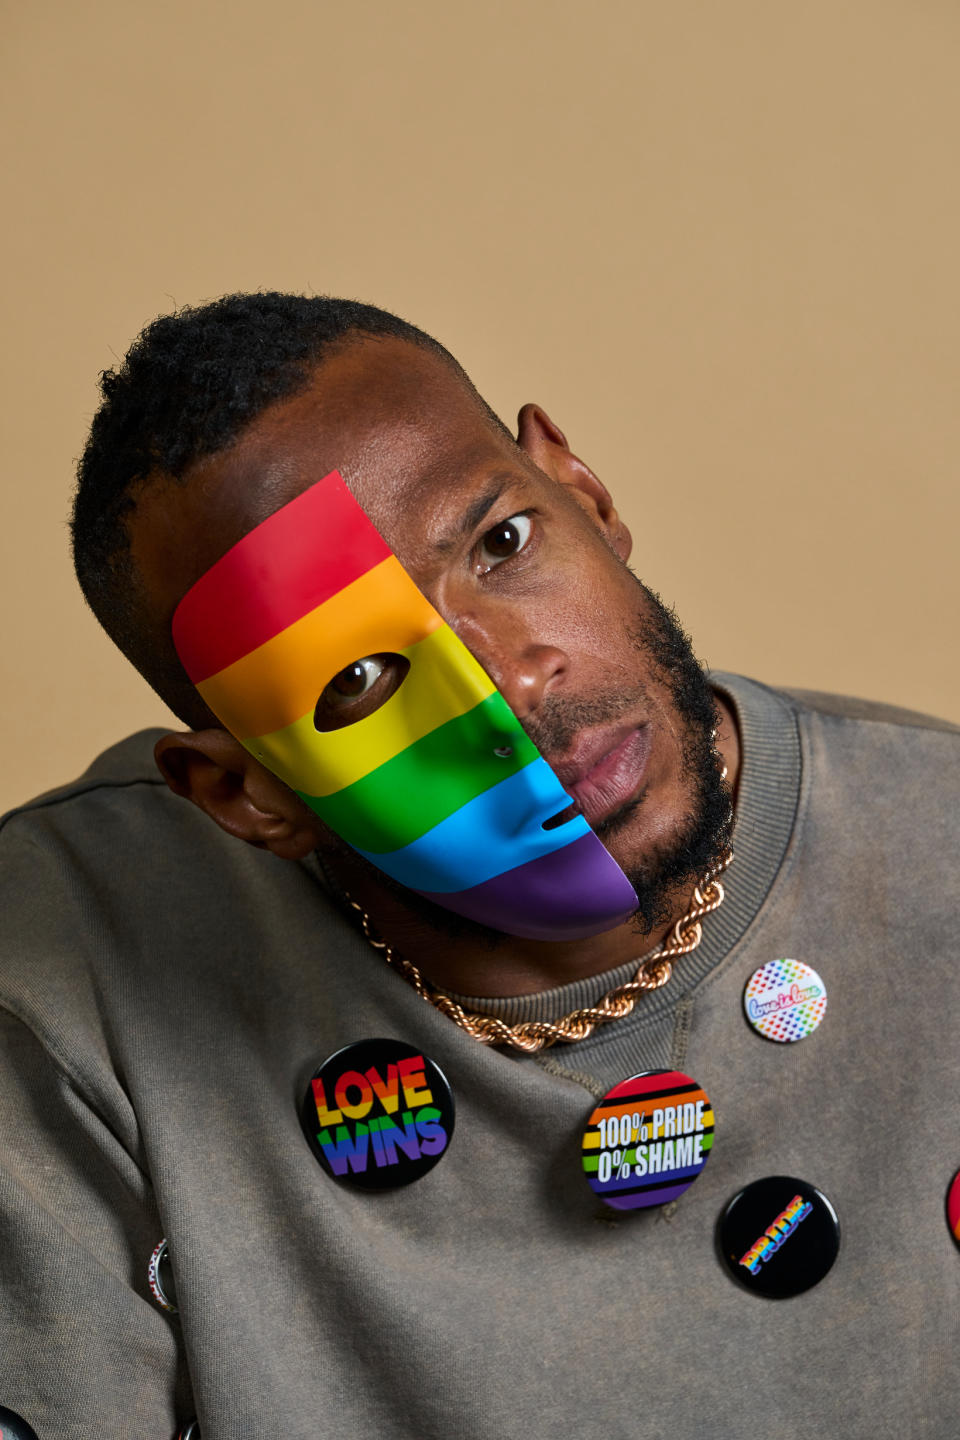 Marlon Wayans wearing a rainbow mask and a gray sweatshirt adorned with LGBTQ+ supportive pins, including "Love Wins" and "100% Pride, 0% Shame."